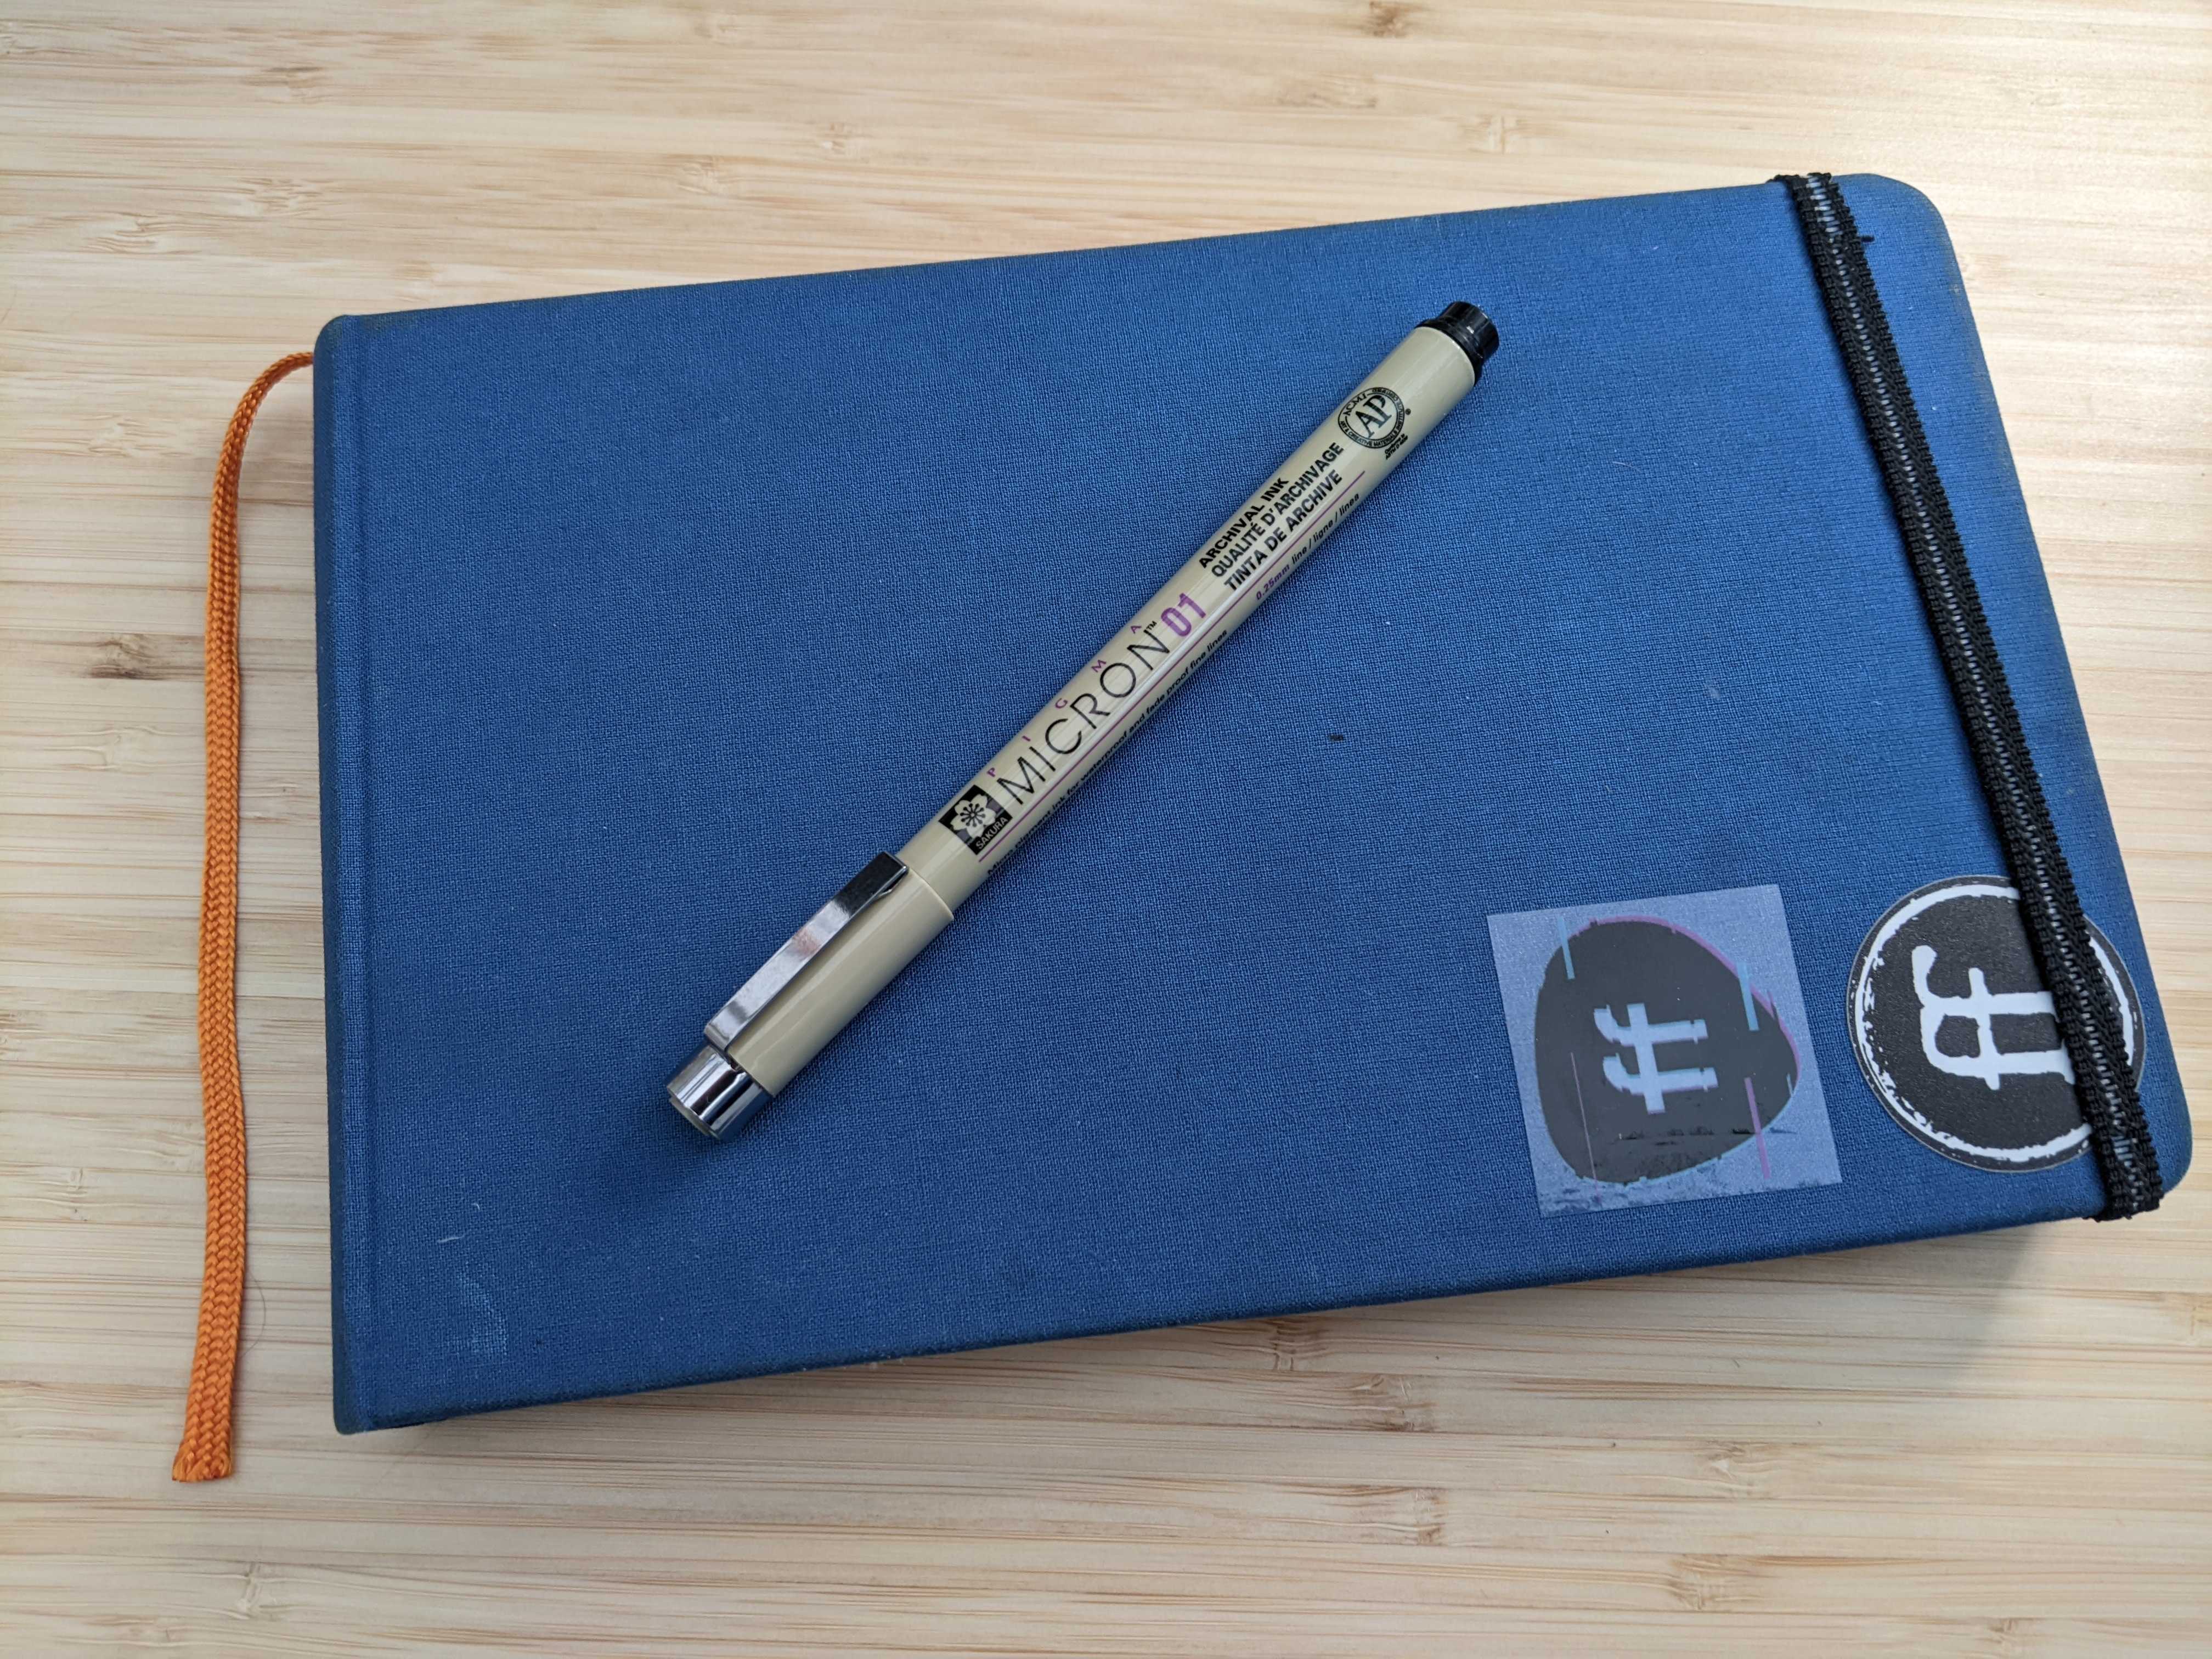 The most minimal setup, sketchbook and pen (Pigma Micron 01)